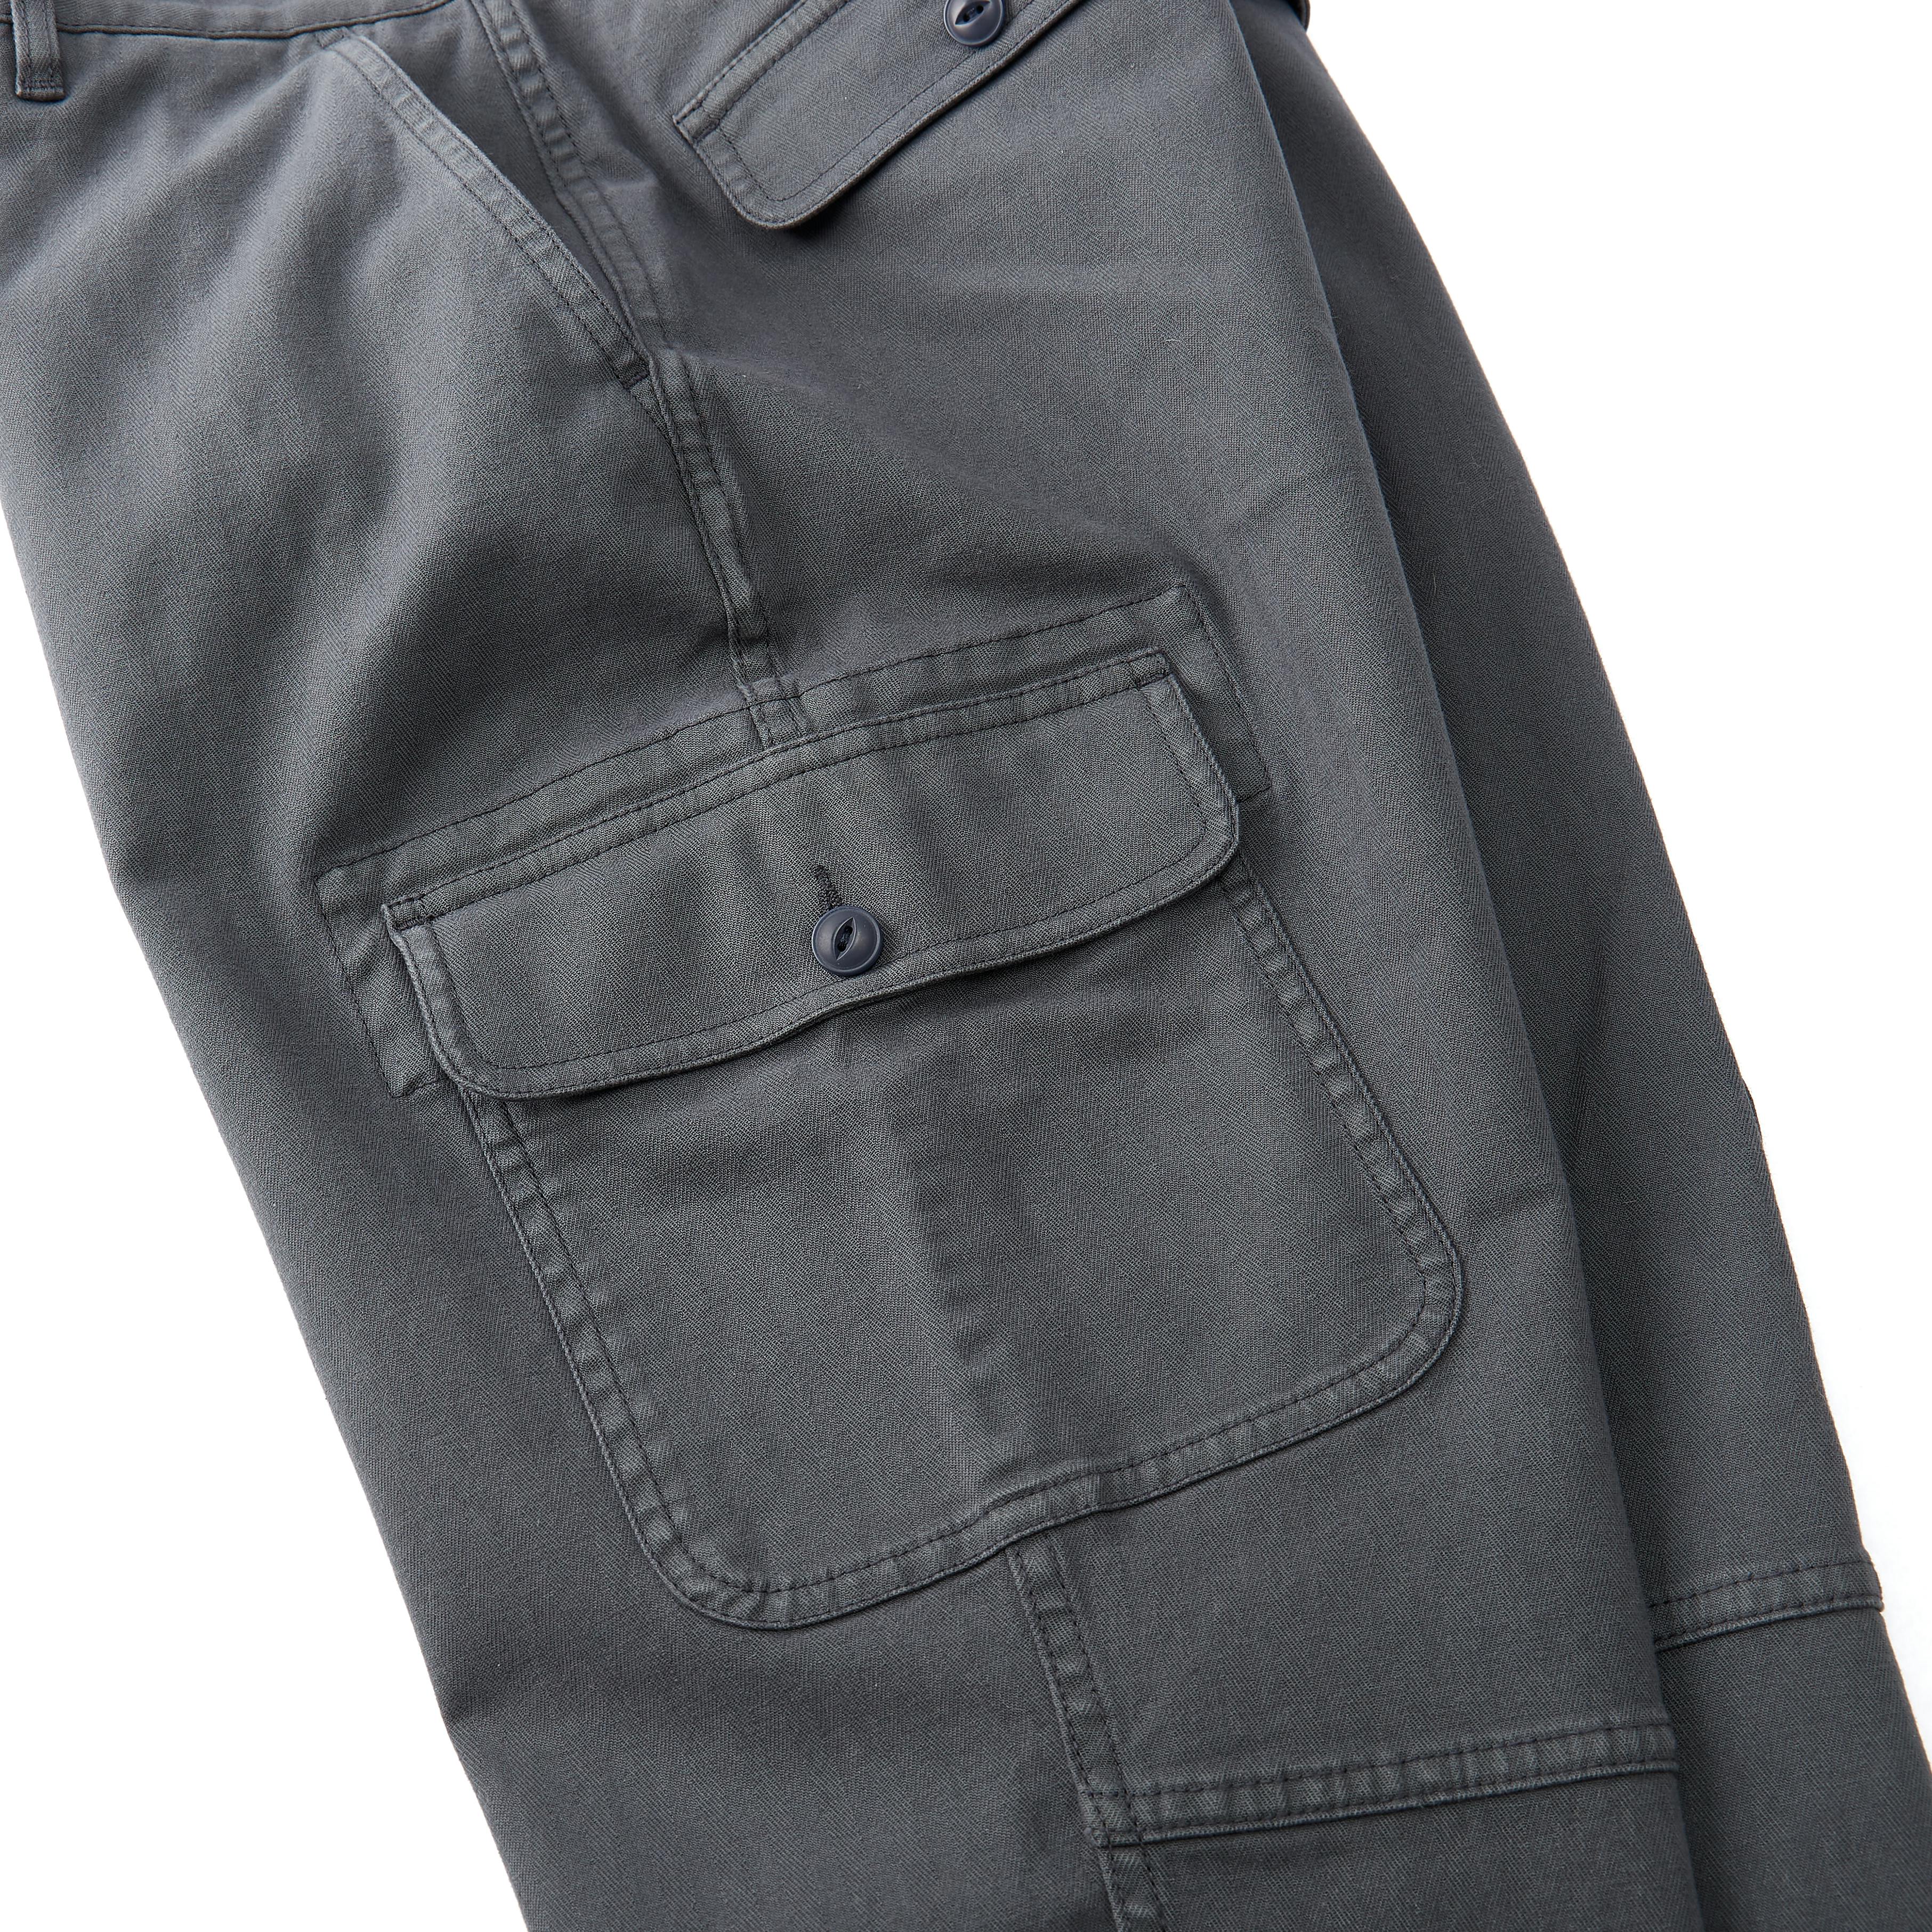 Flint and Tinder Tailored Utility Pant